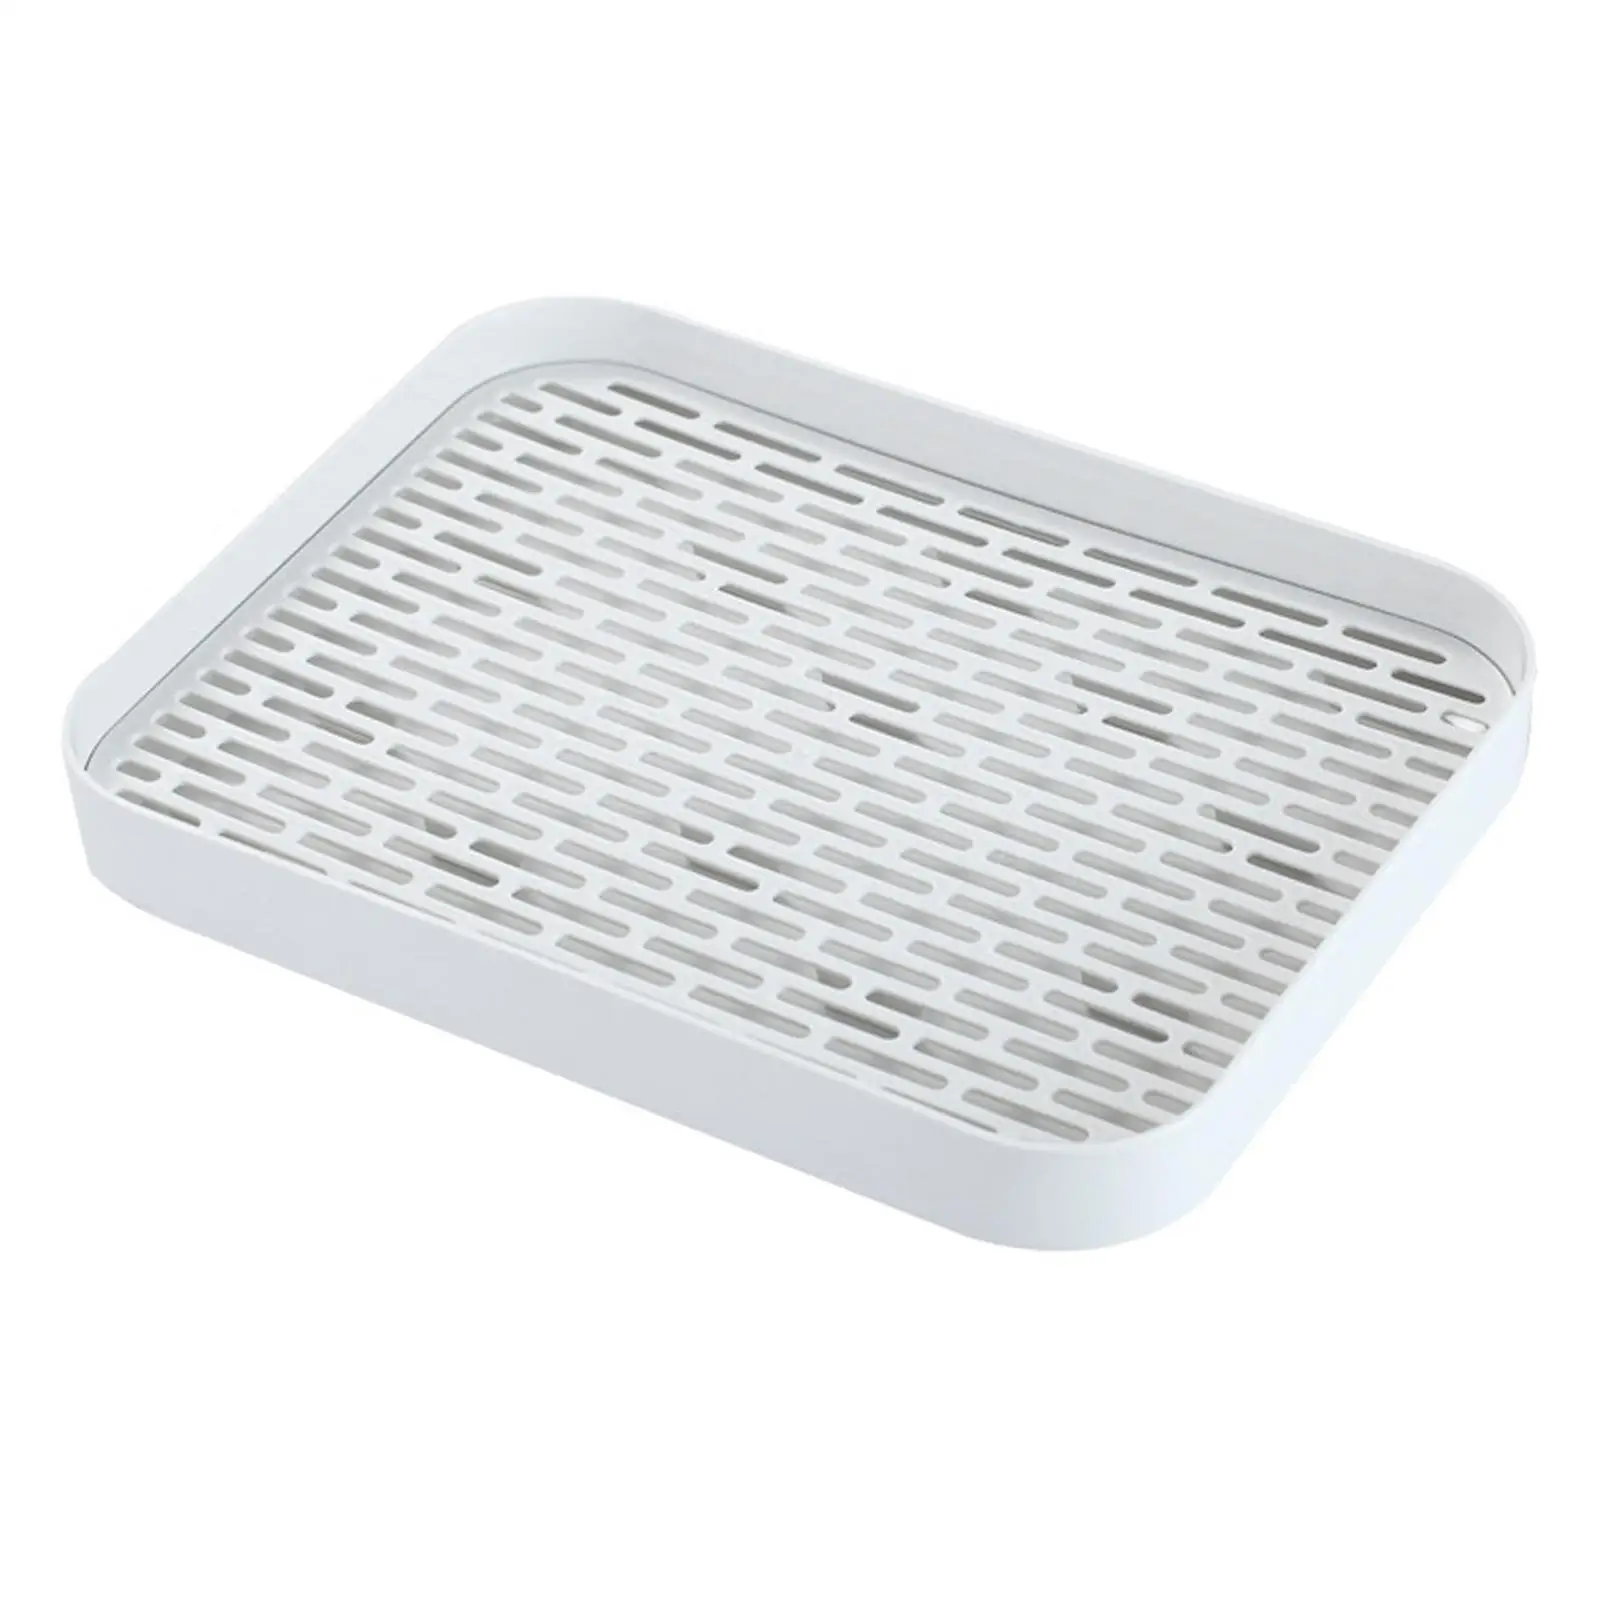 Drainer with Drip Tray Small Dish Drain Board Mat Drainboard Serving Storage Tray for Cup